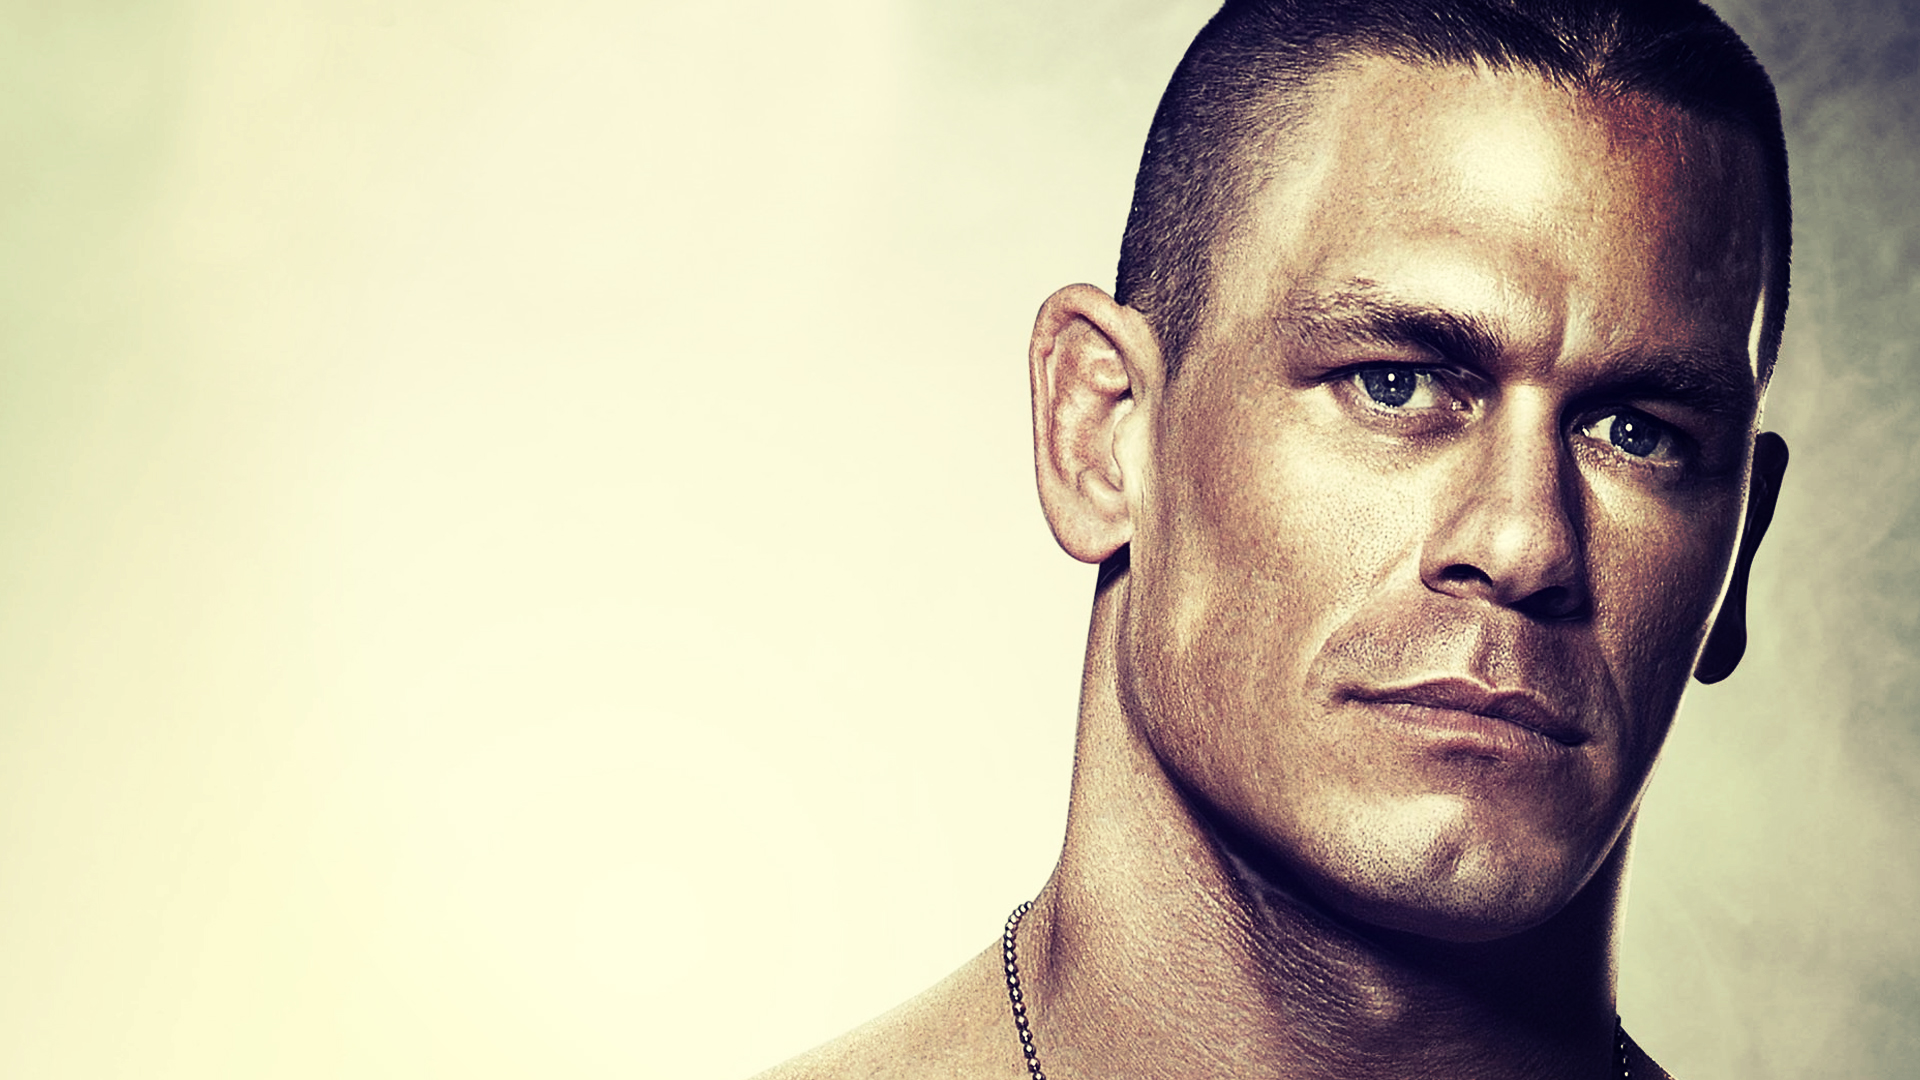 Image Of John Cena New Best Apps For Android